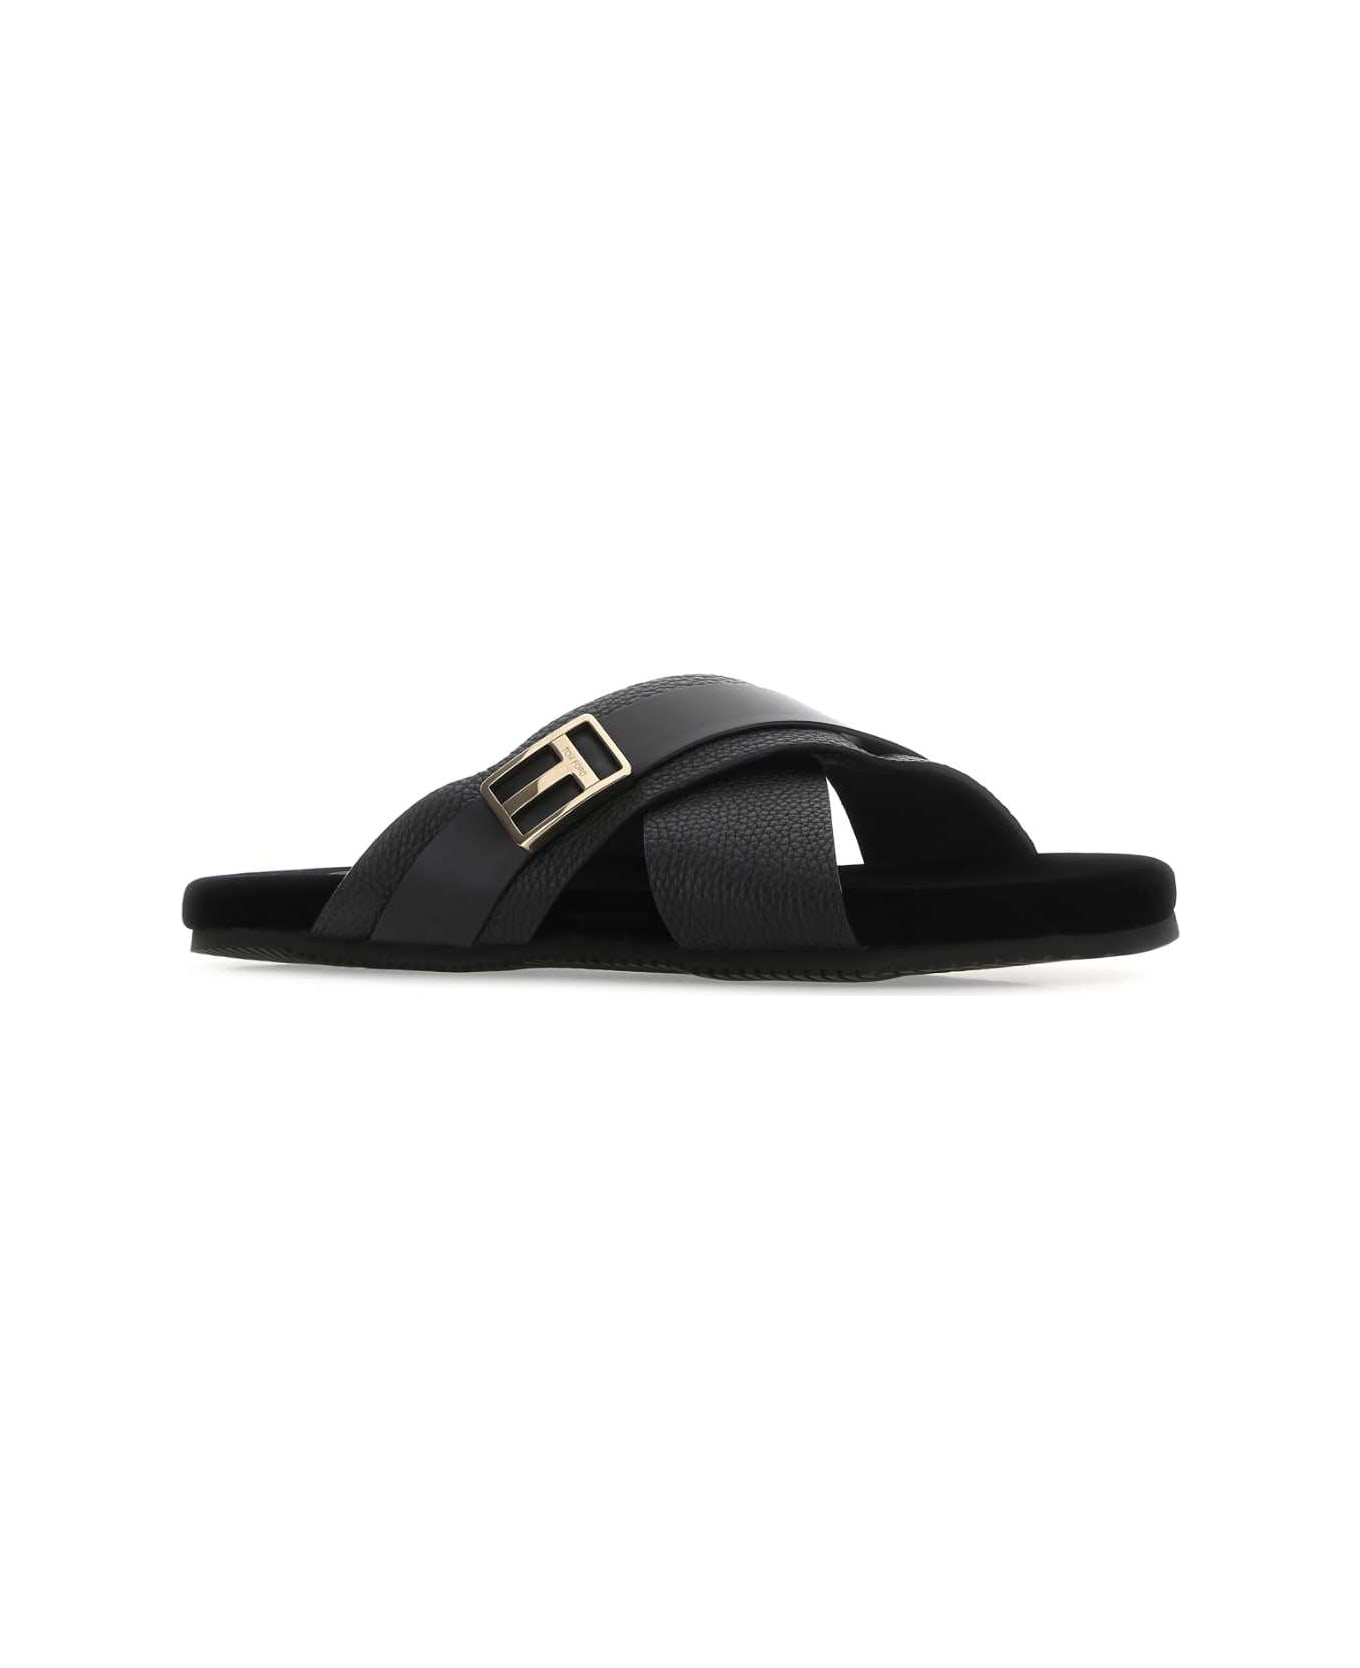 Tom Ford Black Leather Slippers - U9000 その他各種シューズ